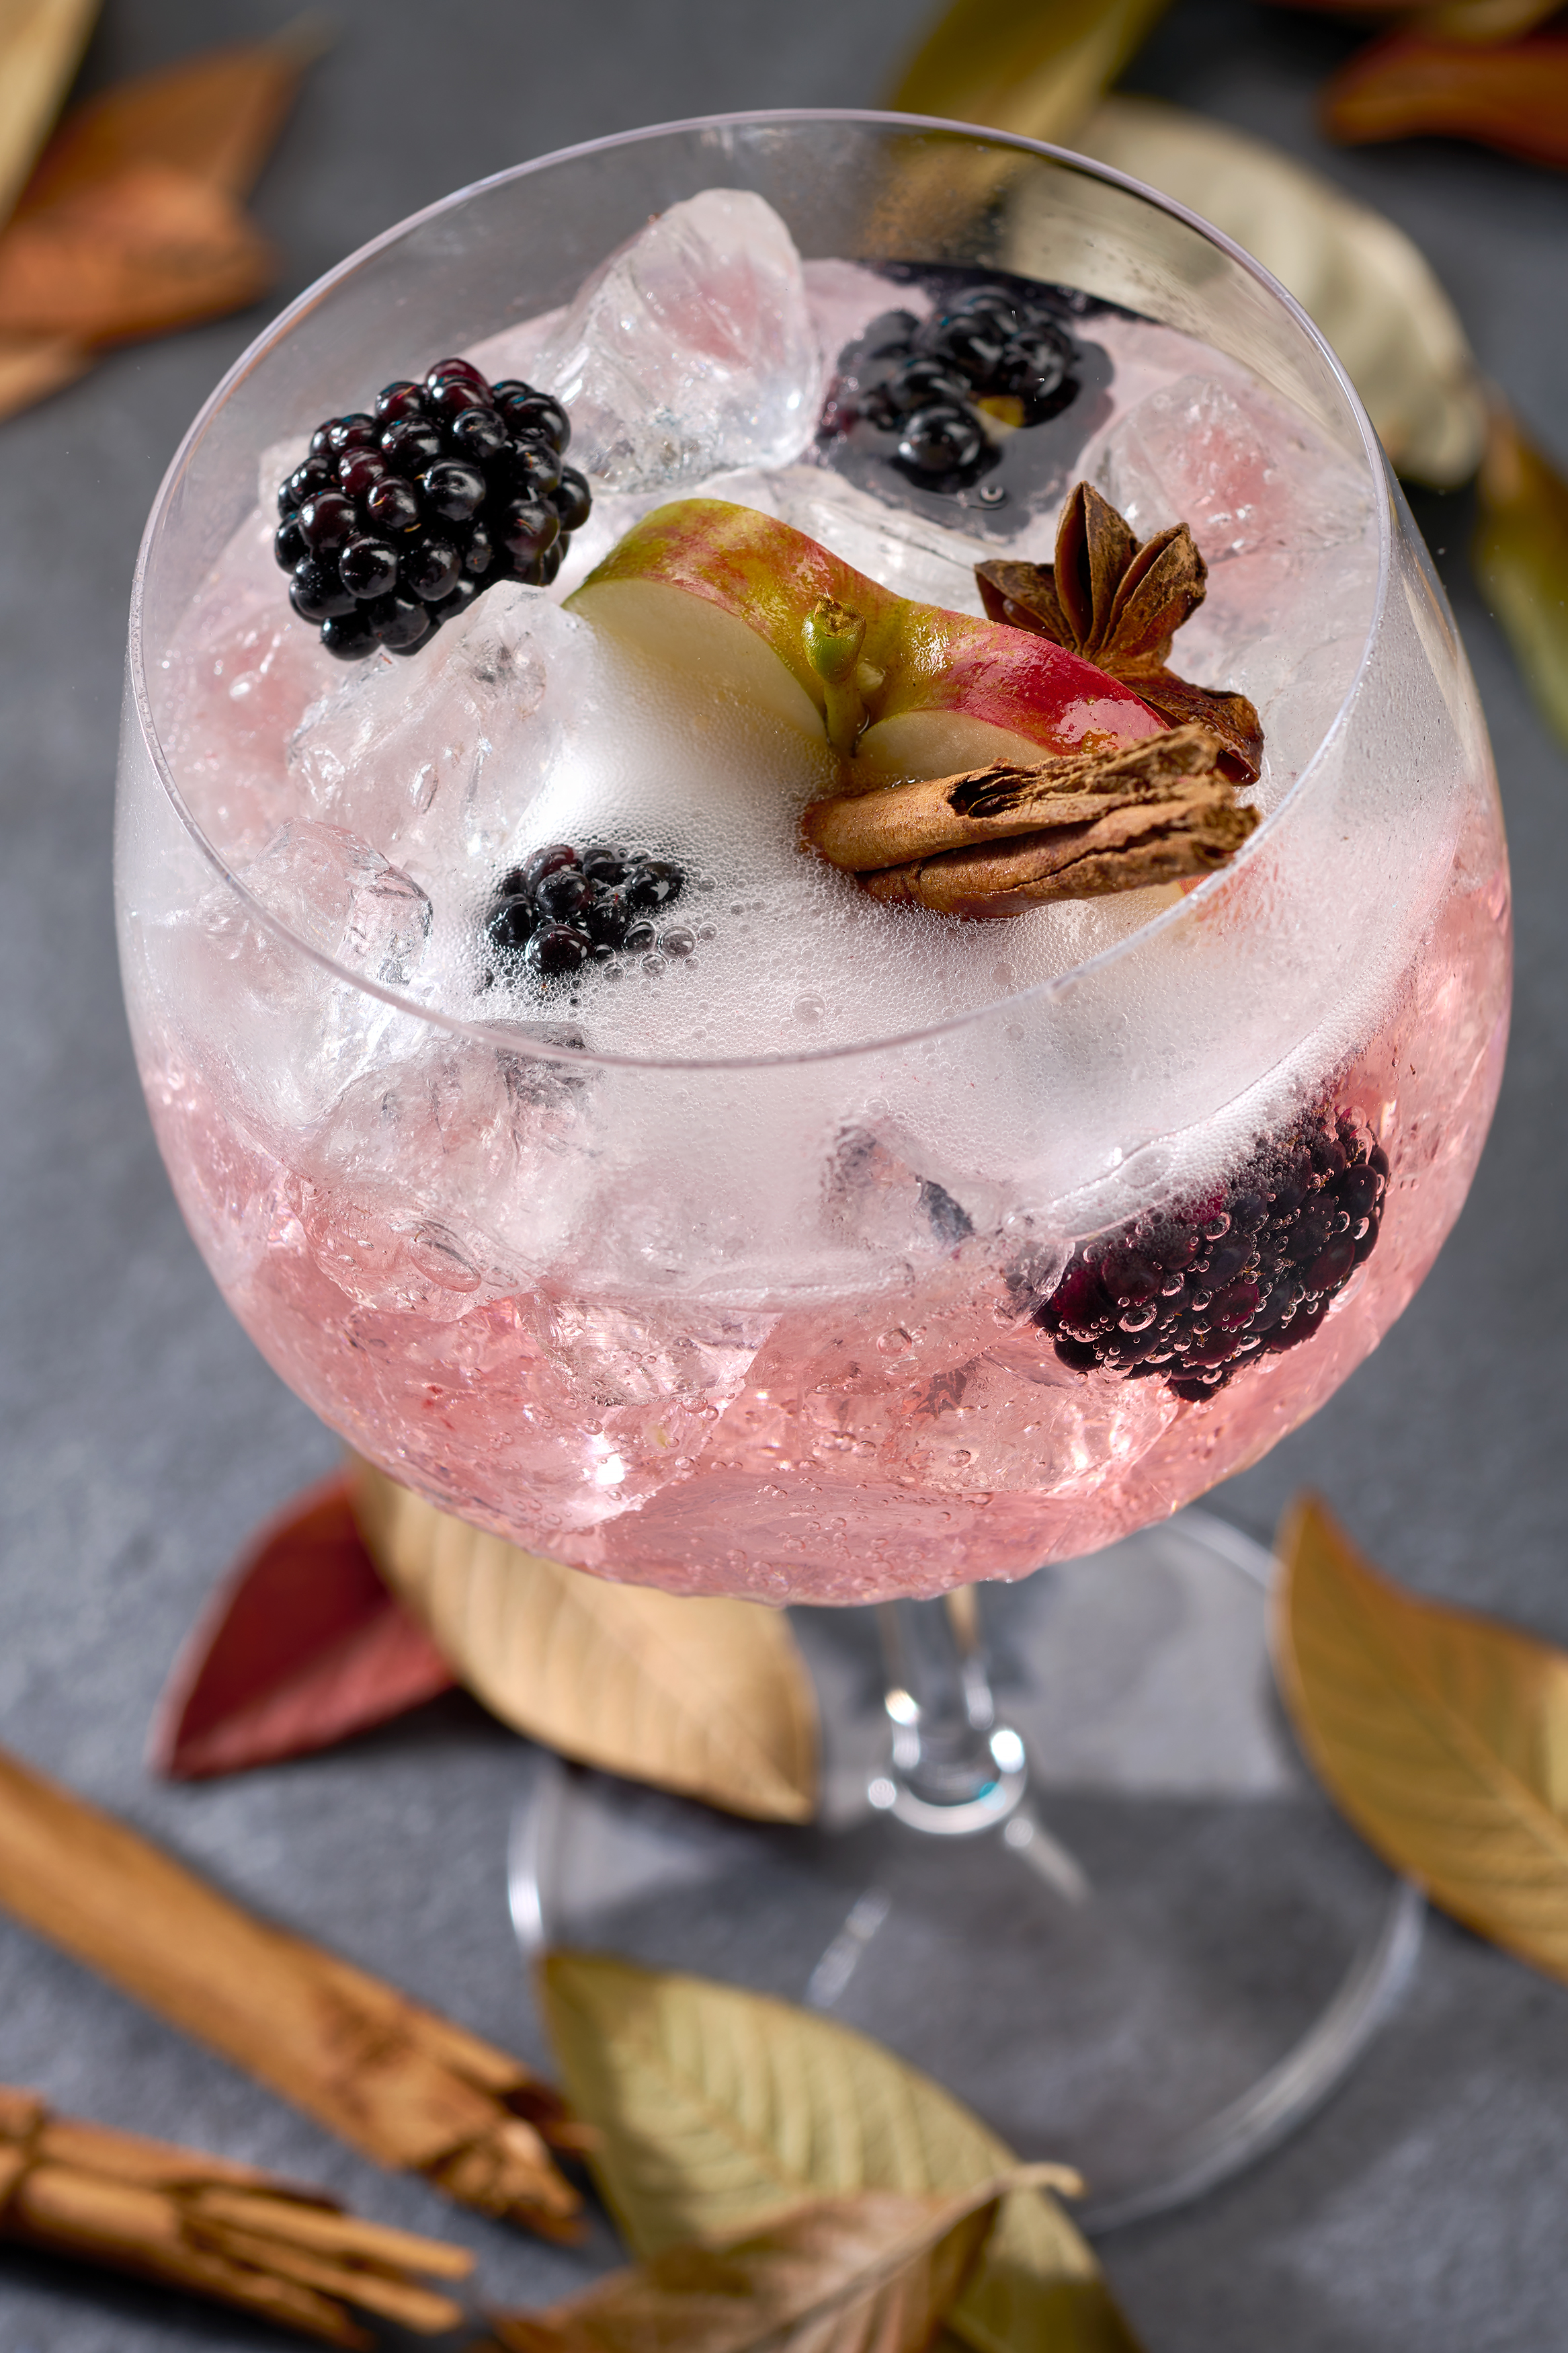 Melford's Gin in a coup glass served with blackberries